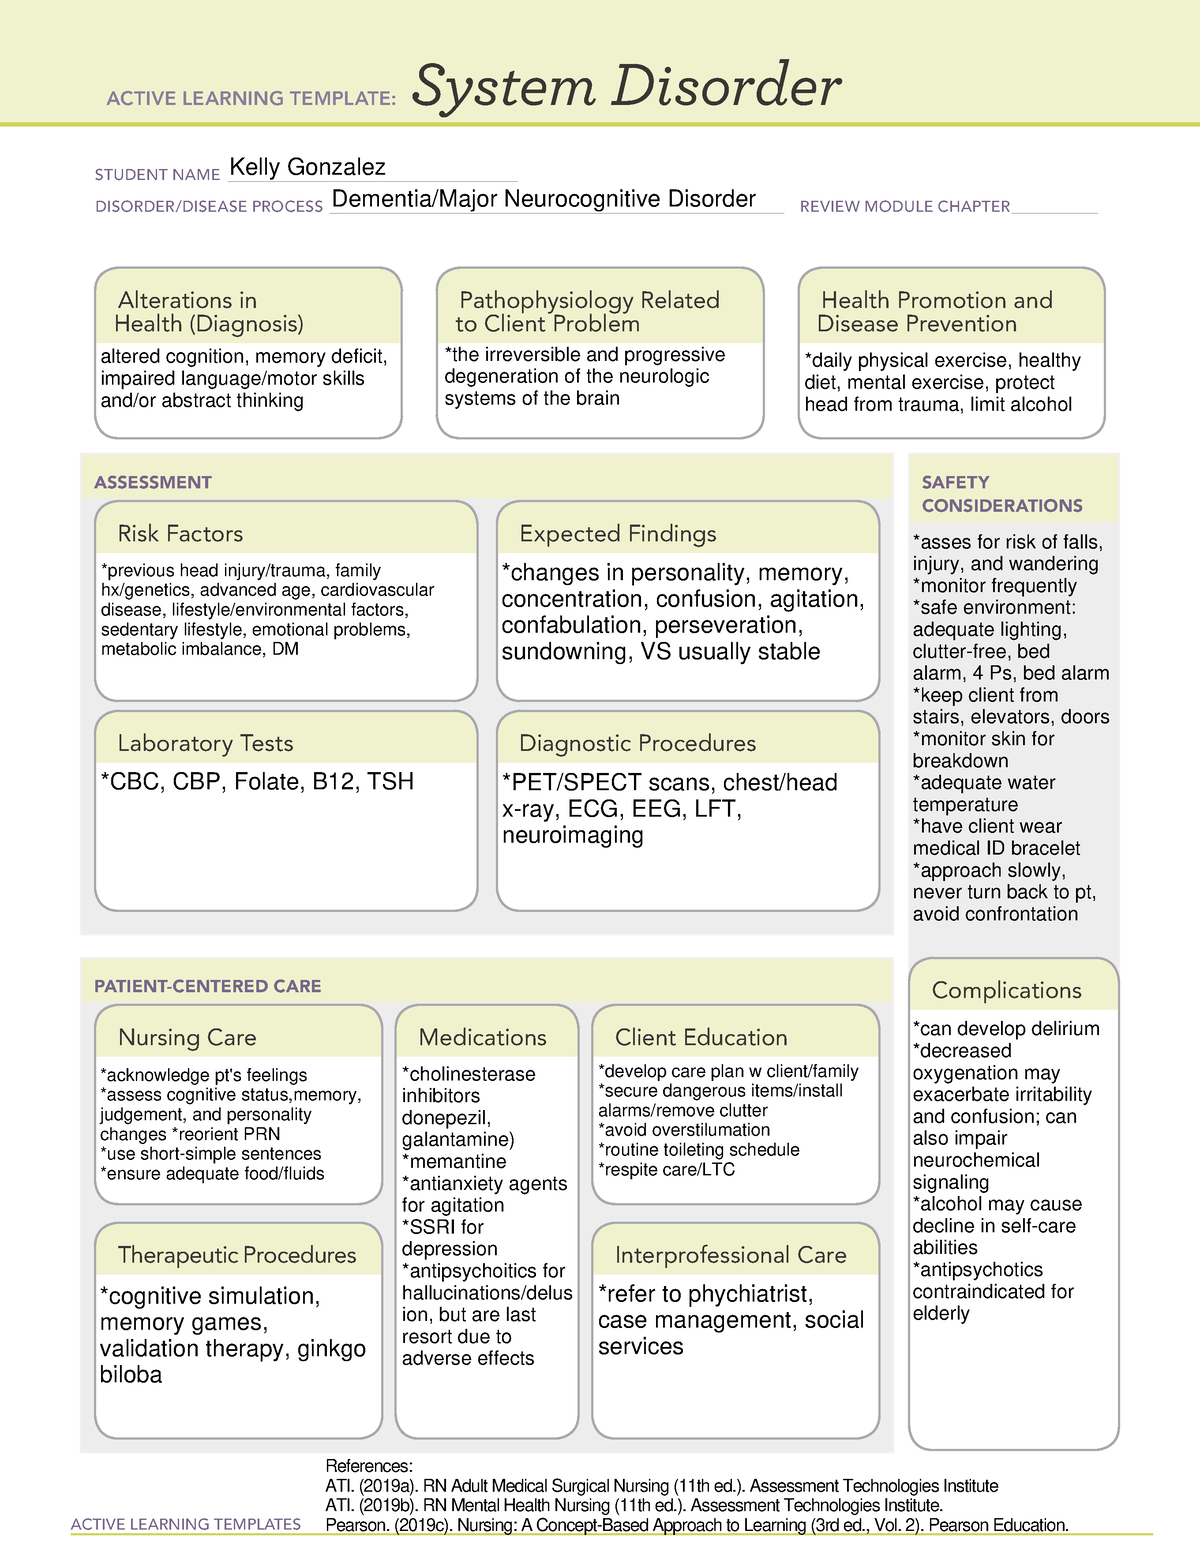 System Disorder: Dementia ACTIVE LEARNING TEMPLATES System Disorder